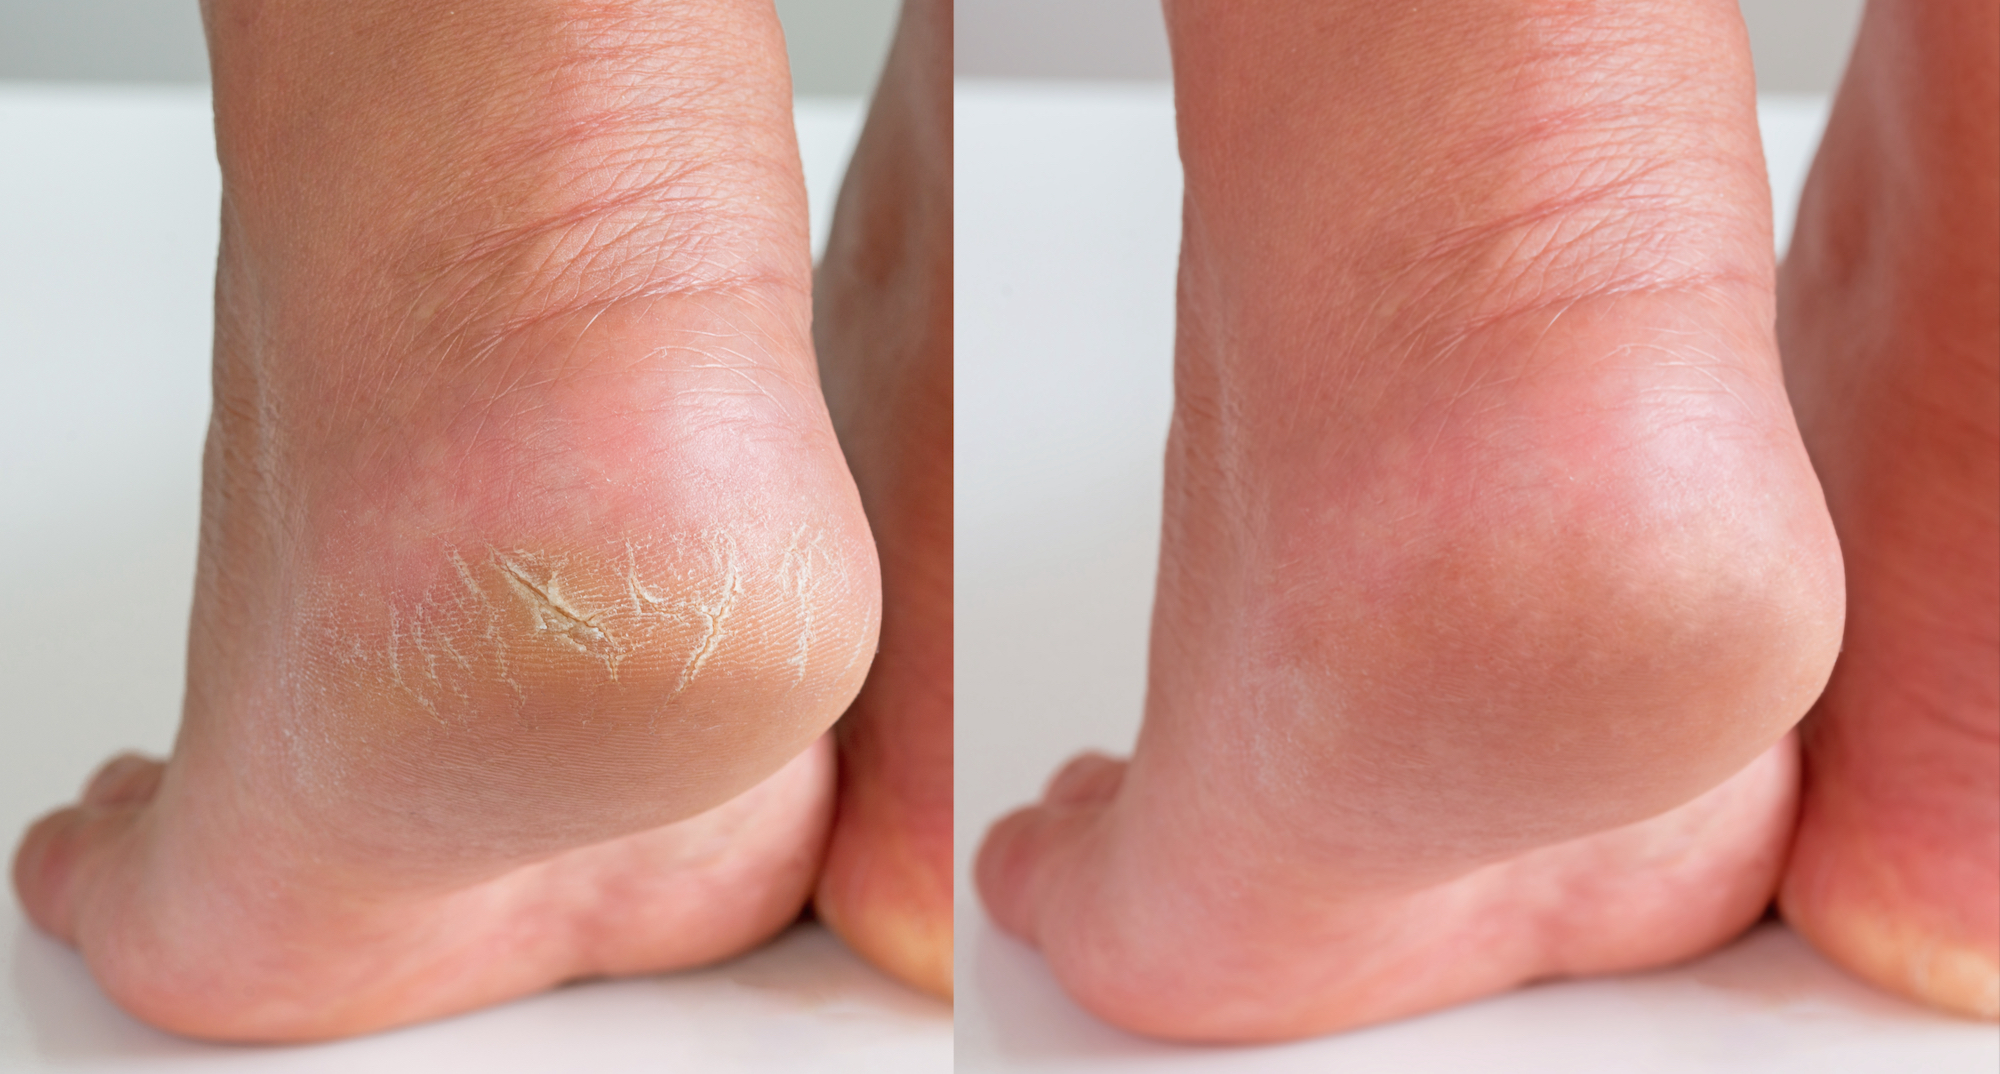 9 DIY Home Remedies for Treating Cracked, Dry Heels « The Secret Yumiverse  :: WonderHowTo